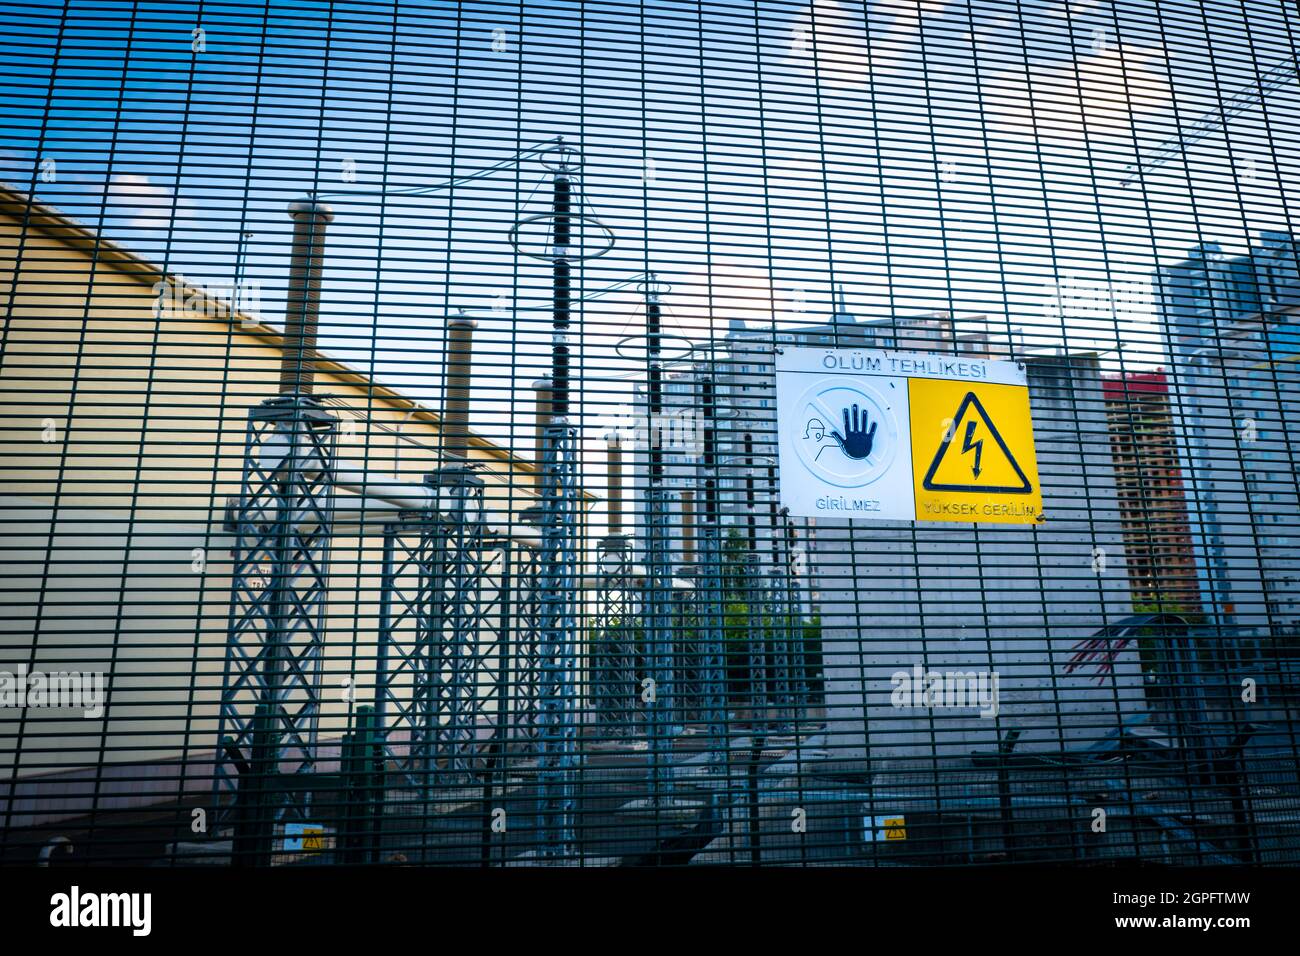 Maltepe, Istanbul, Turkey - 07.22.2021: Turkish warning of death risk, danger, no entry on the fence of electrical distribution substation components Stock Photo